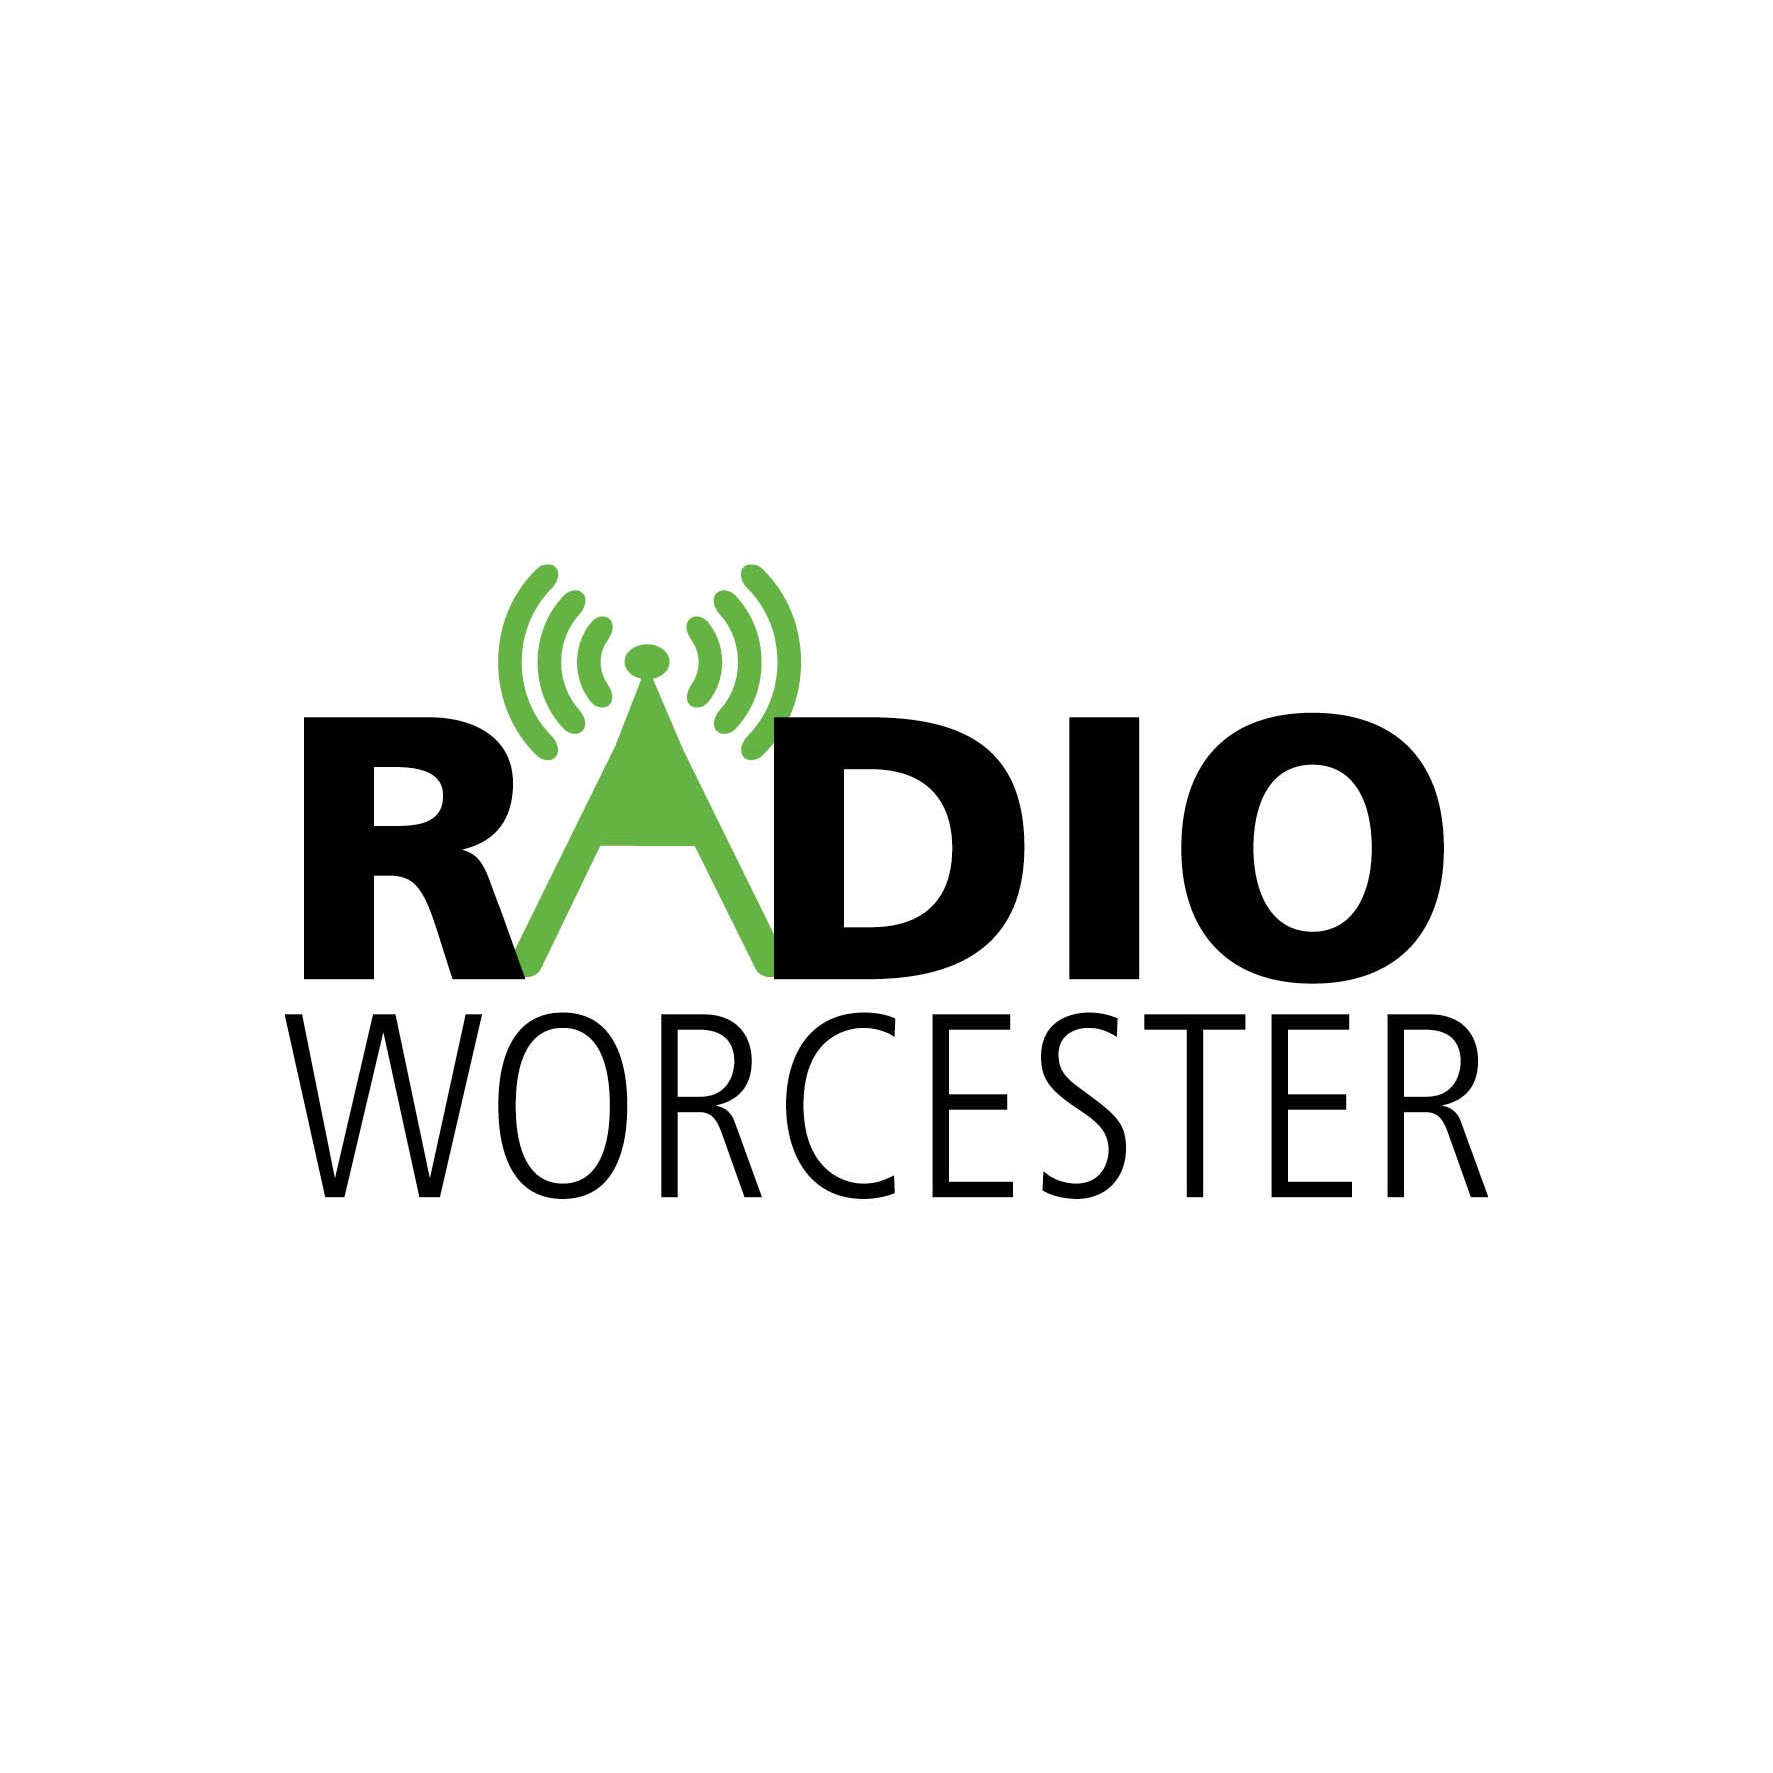 Listen anywhere.  Worcester's most complete news and talk network. Talk of the Commonwealth with Hank Stolz heard mornings at https://t.co/fMTDIT6io5 and AM 830 WCRN